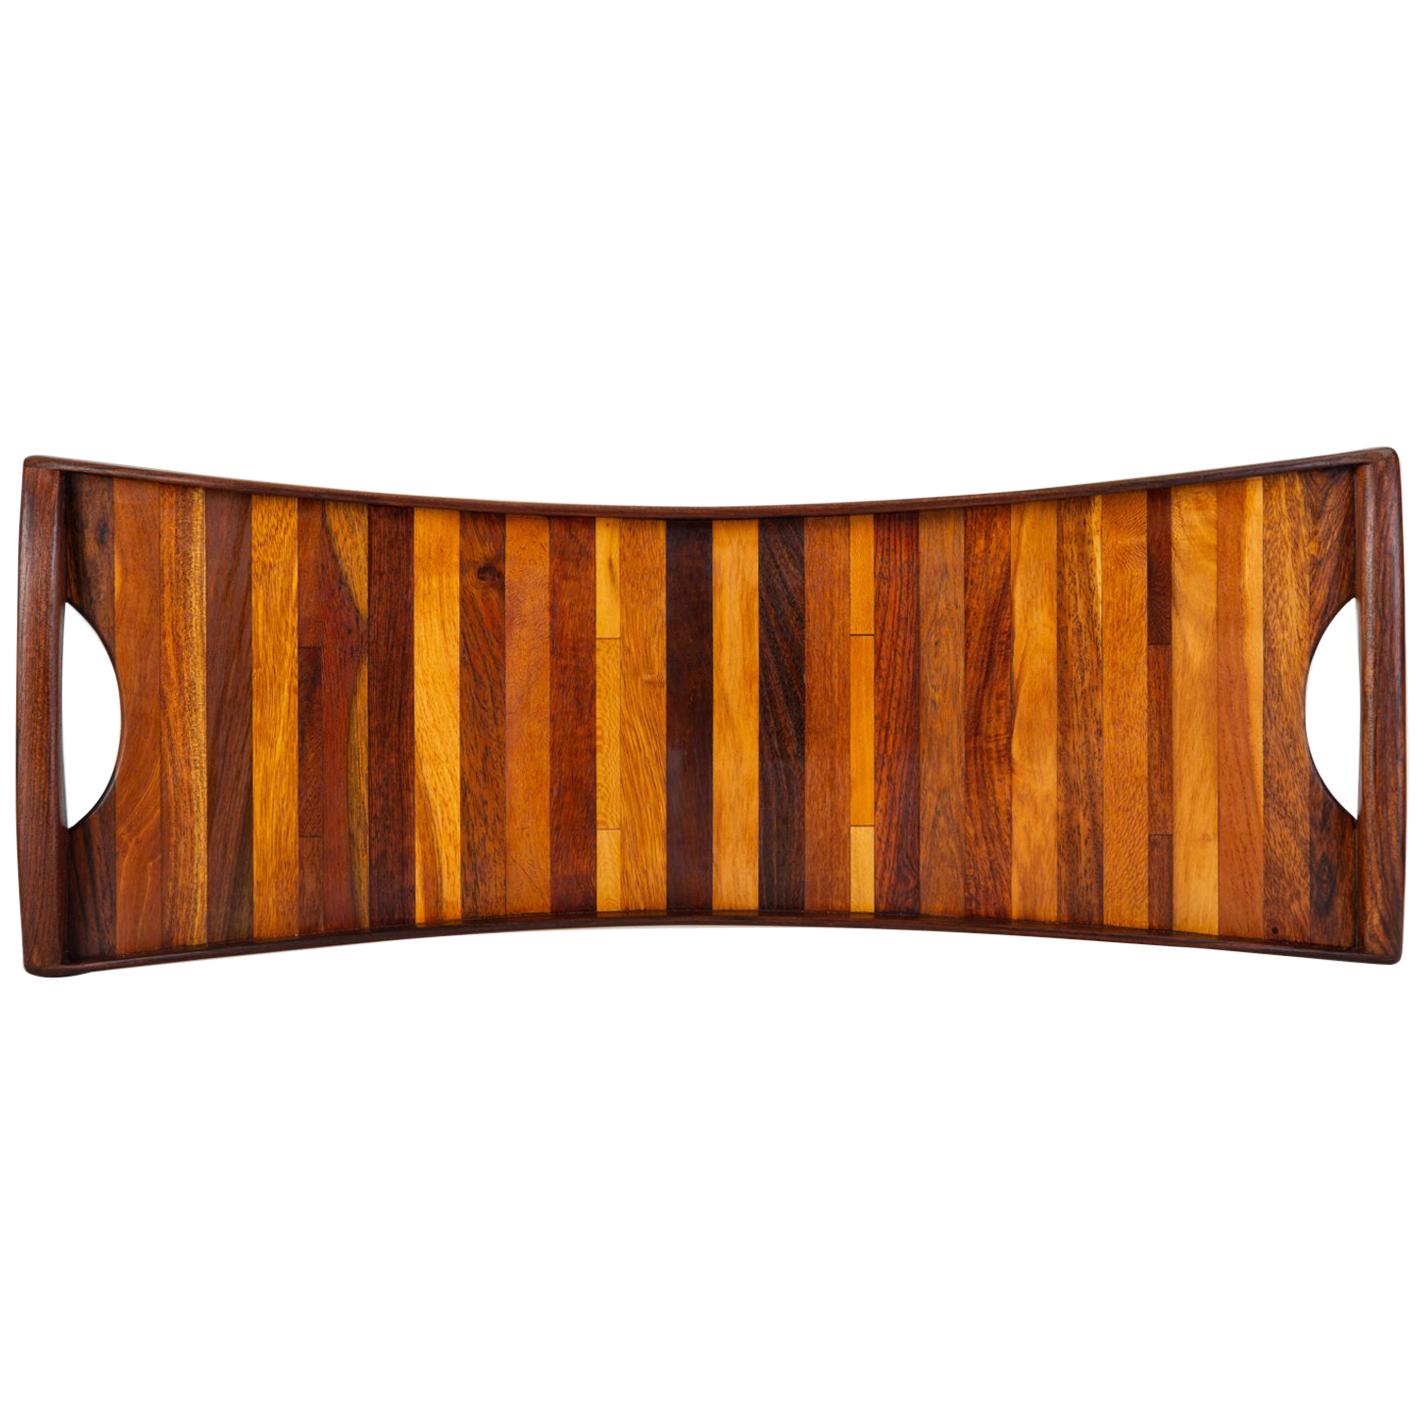 Narrow Striped Tray by Don Shoemaker for Señal